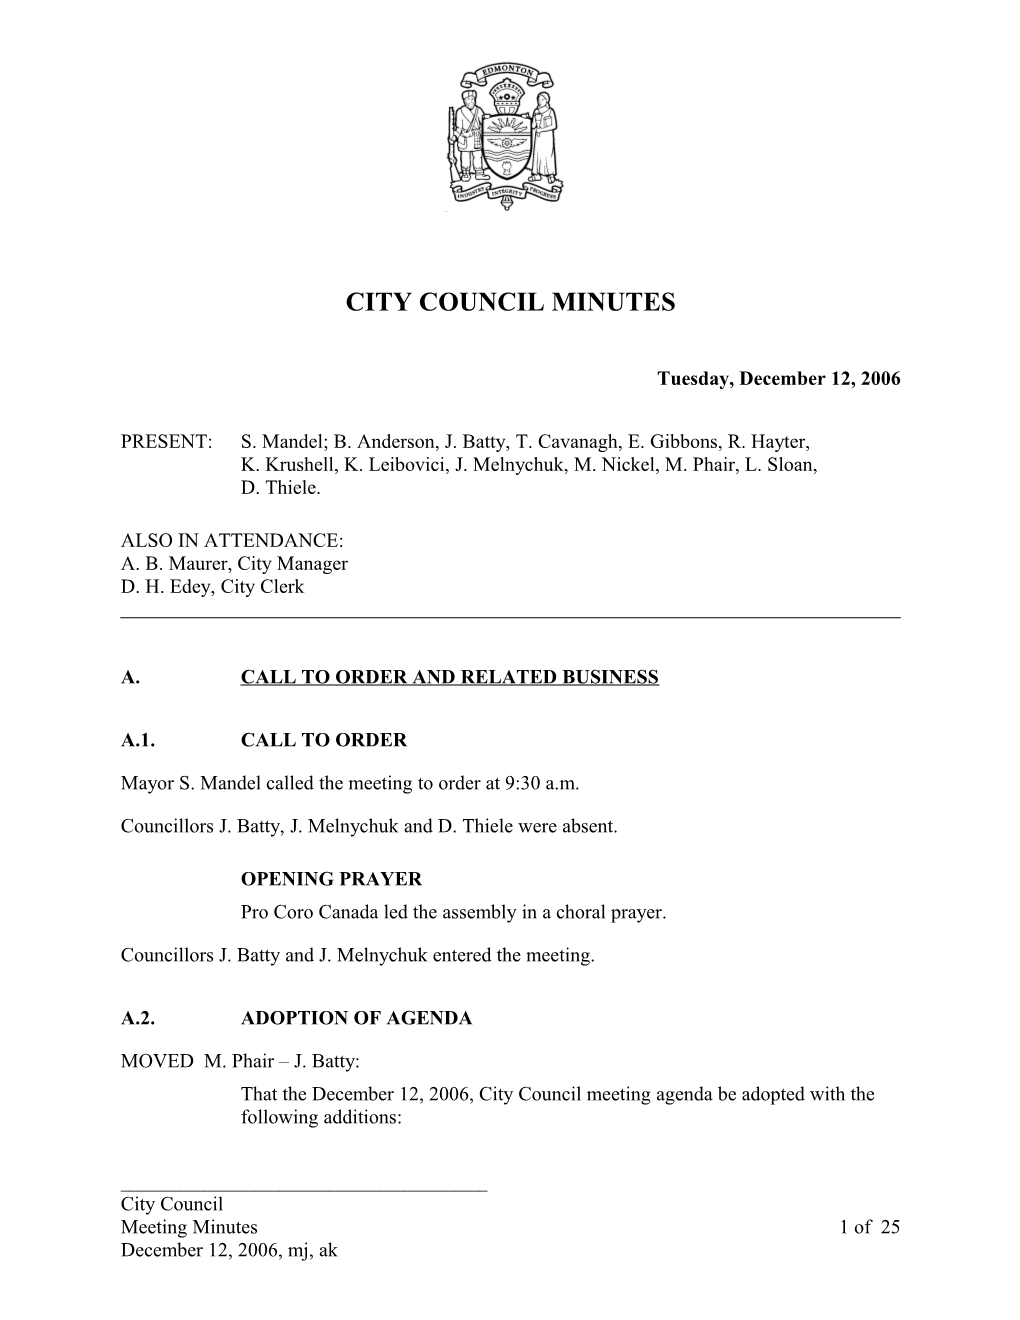 Minutes for City Council December 12, 2006 Meeting